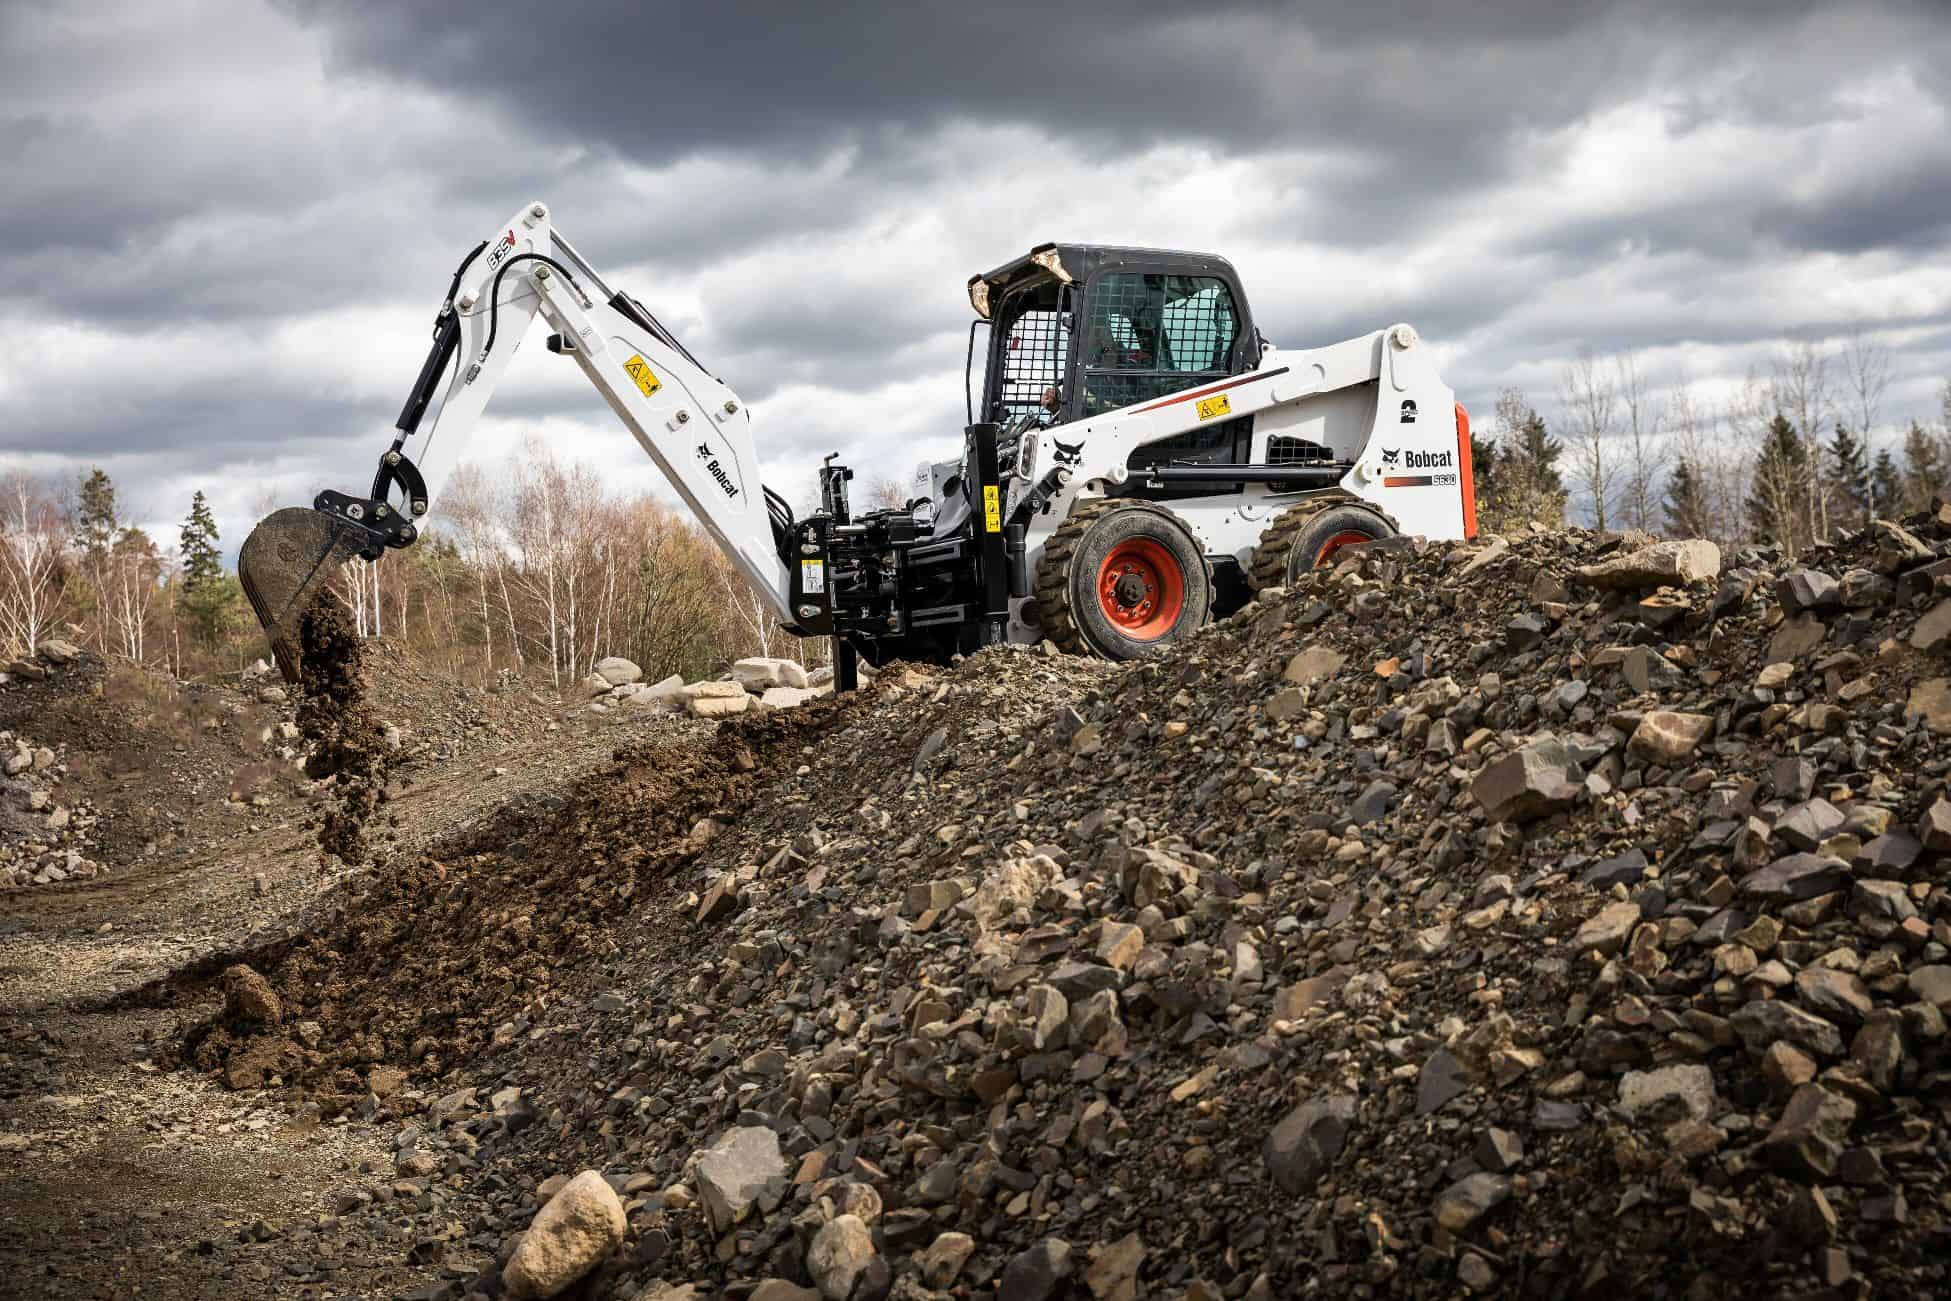 New backhoe attachment for Bobcat compact loaders